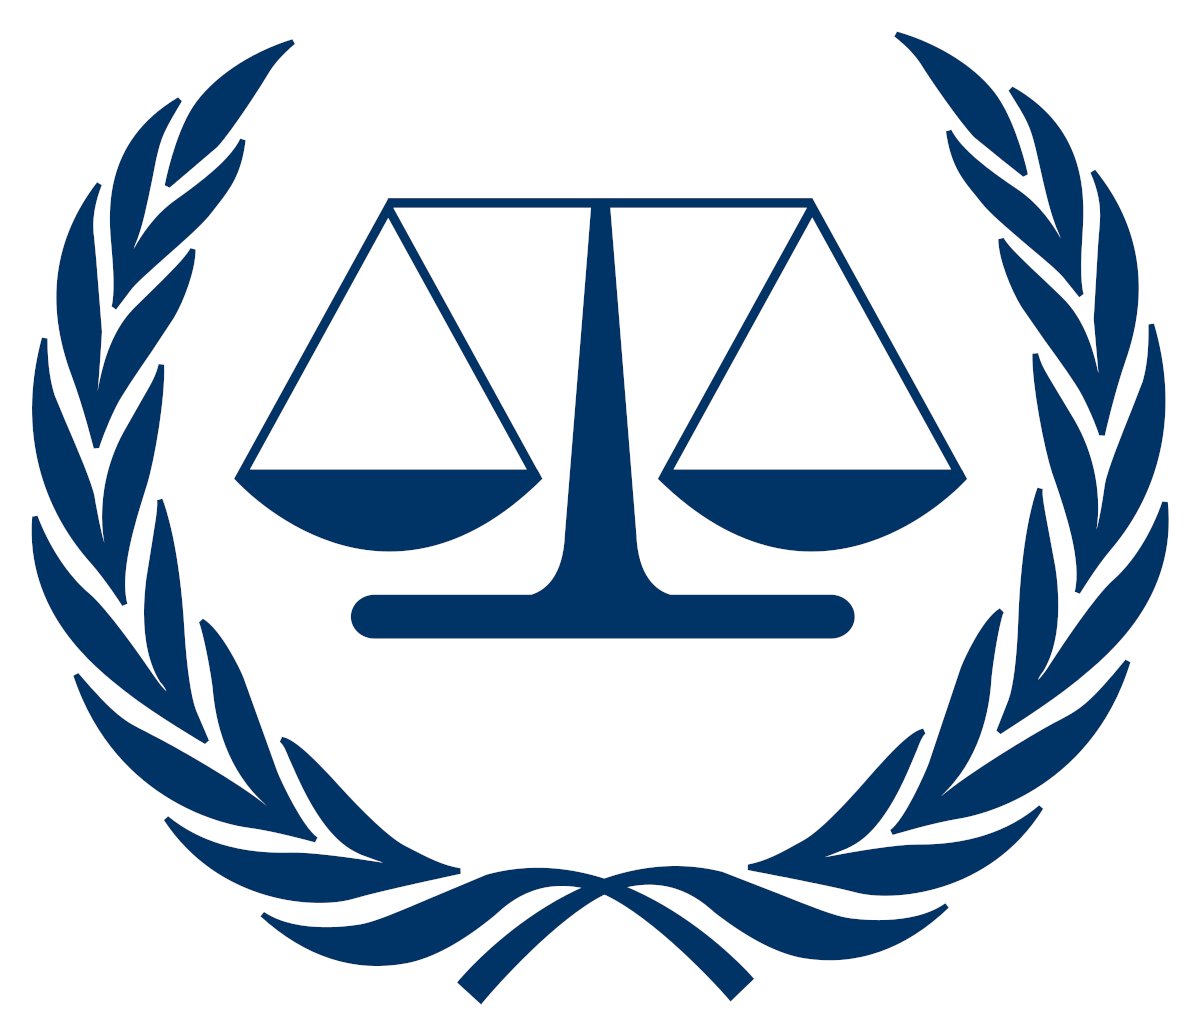 I am dismayed by political attacks in some western countries on the independence of the International Criminal Court. The ICC is doing its job to impartially uphold international justice, regardless of the perpetrator, when countries have failed to do so ohchr.org/en/press-relea…